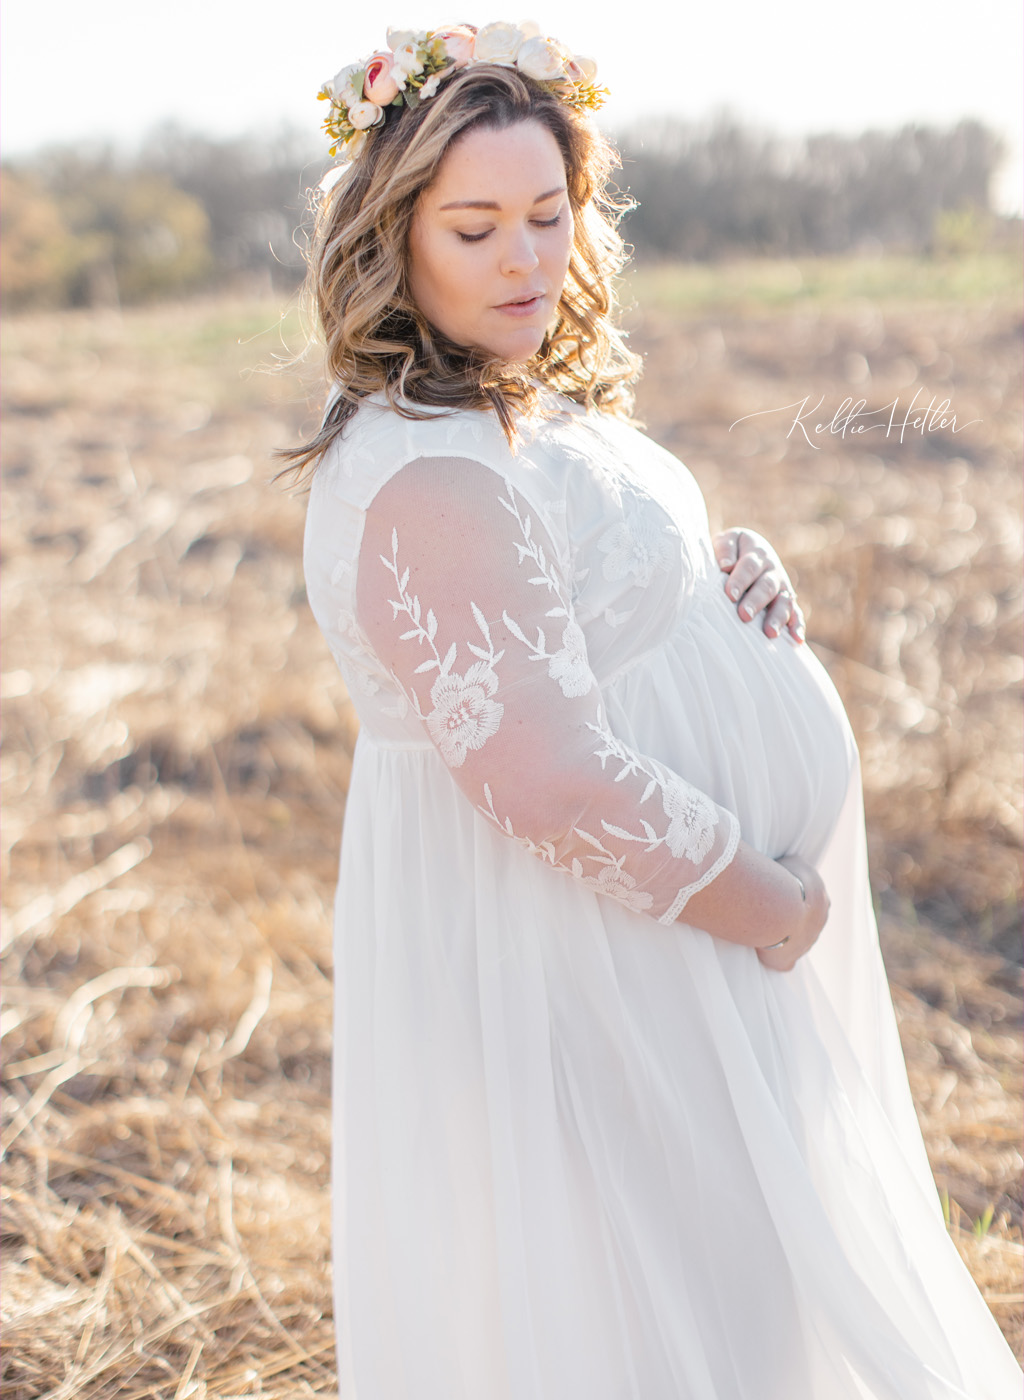 Pregnant mom in a field in a white gown and floral crown